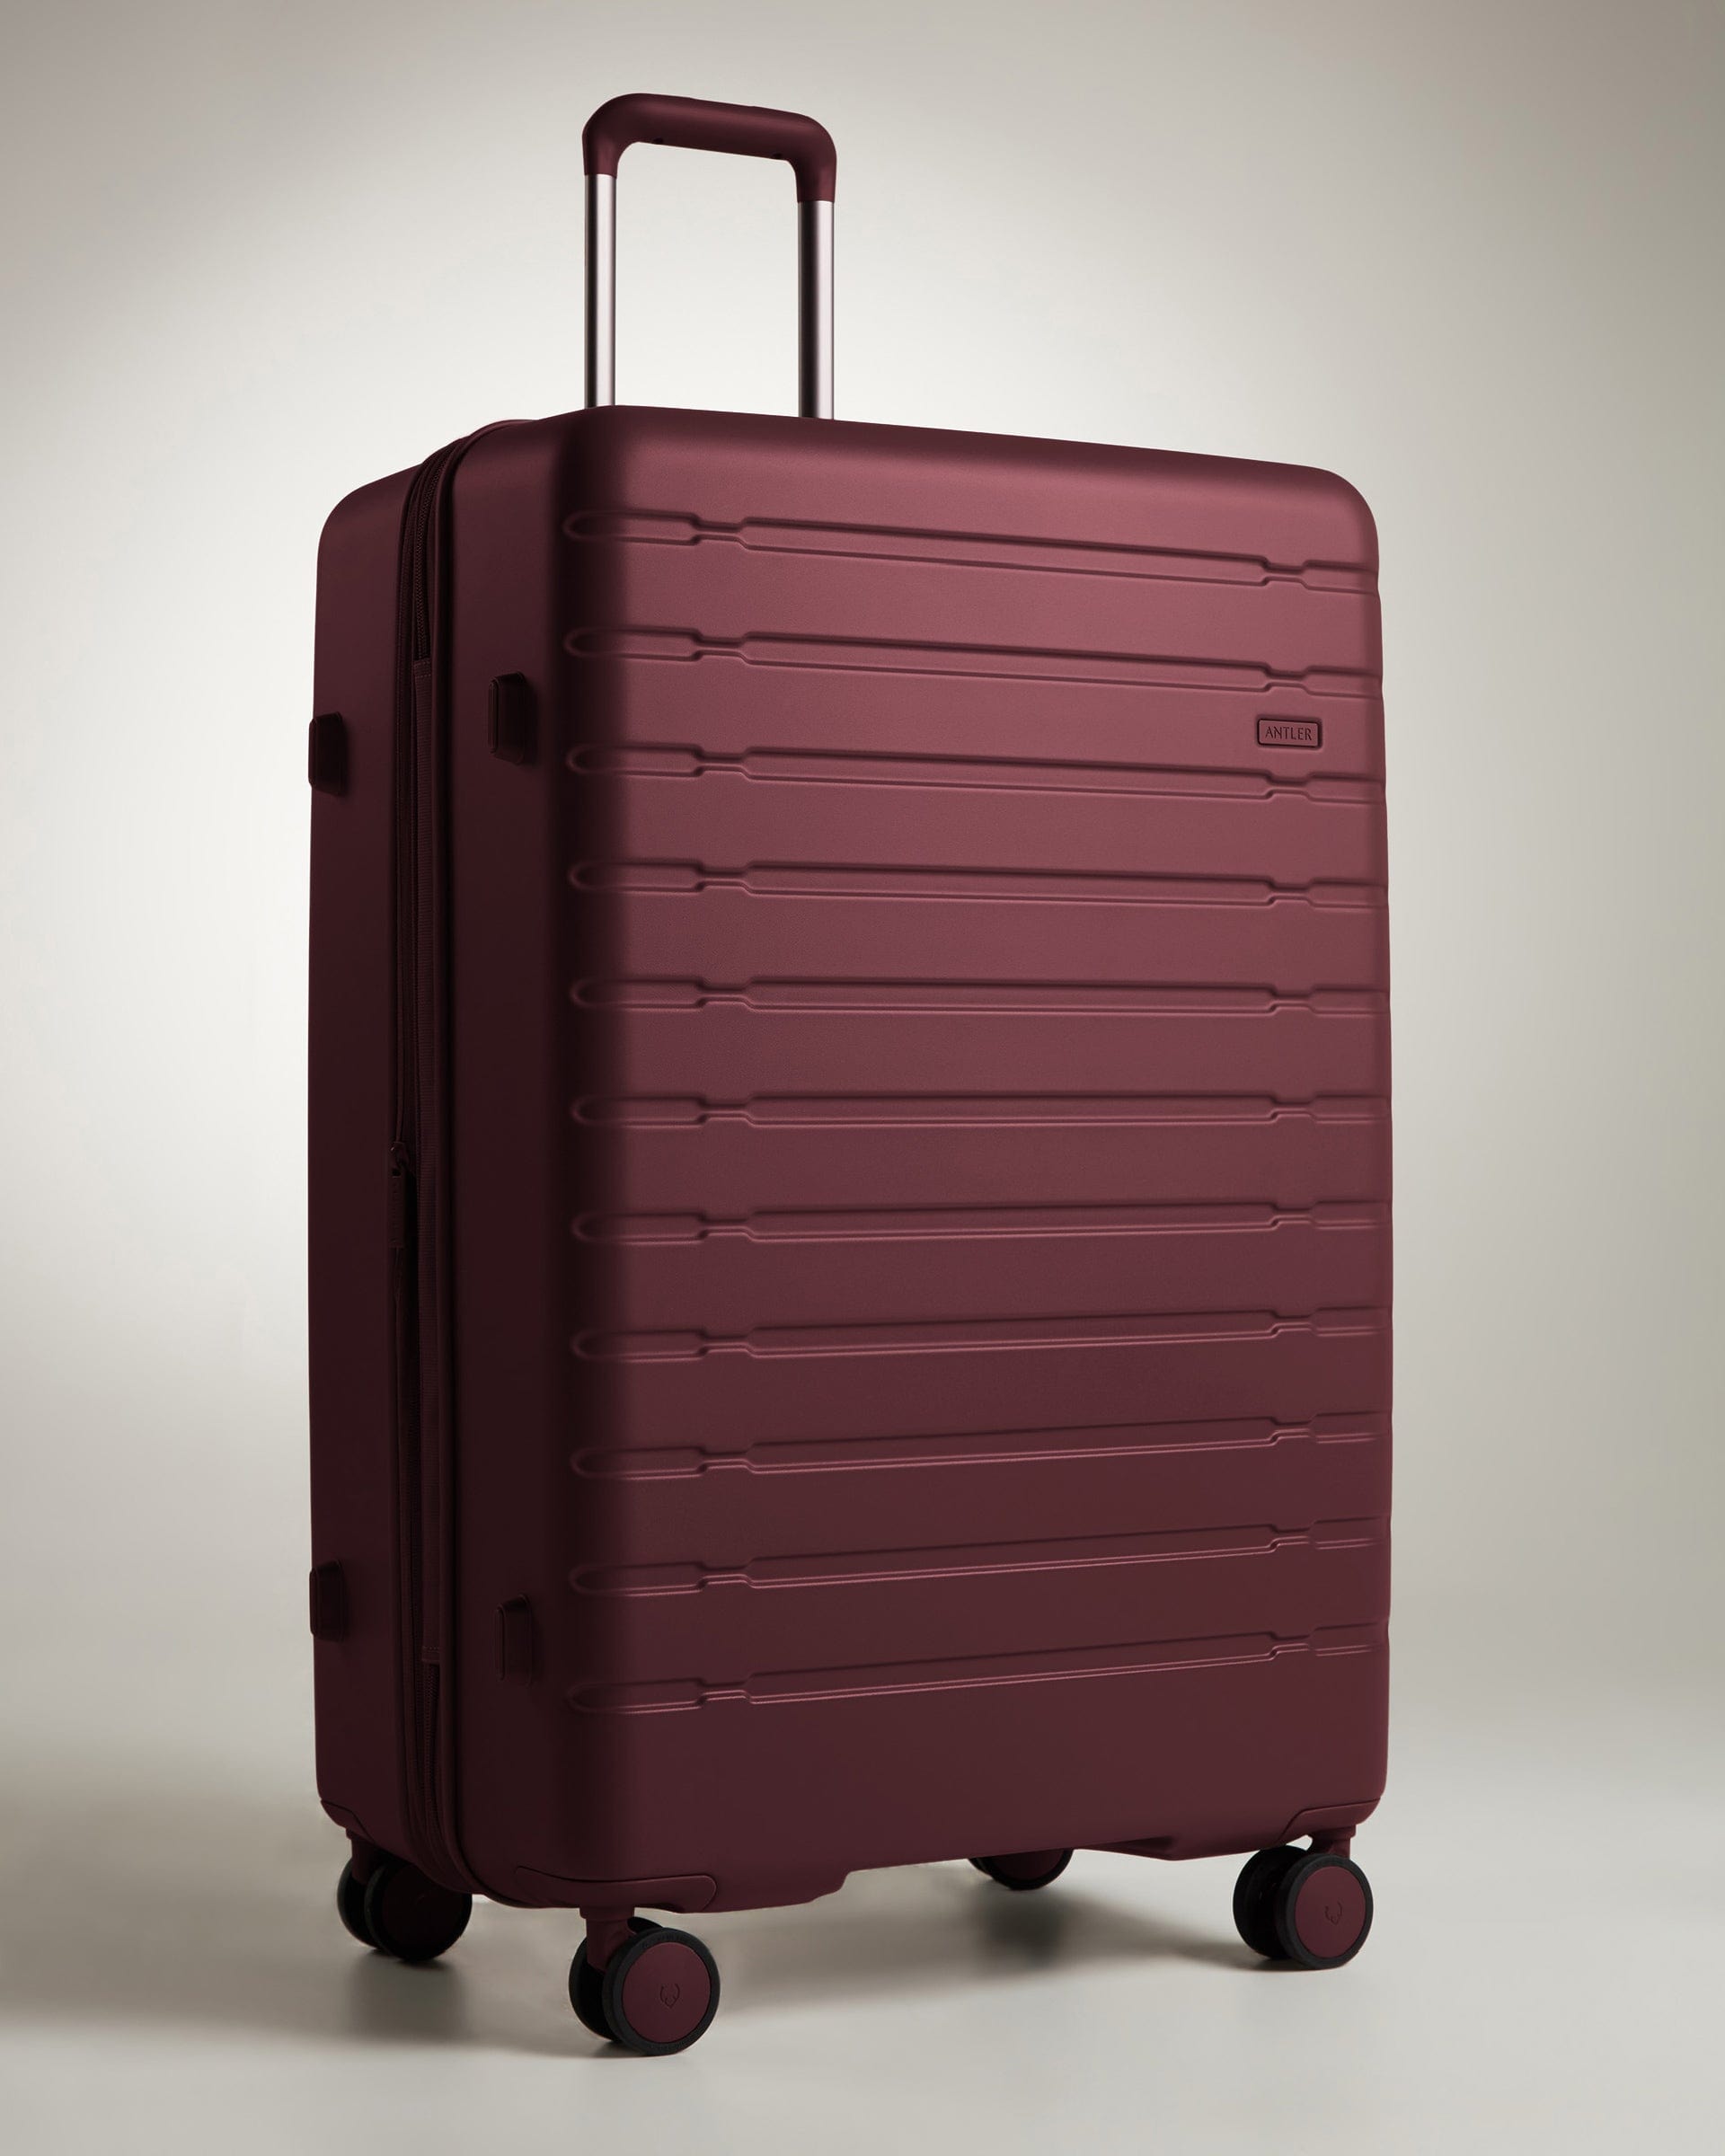 View Antler Stamford 20 Large Suitcase In Berry Red Size 345cm x 54cm x 815cm information